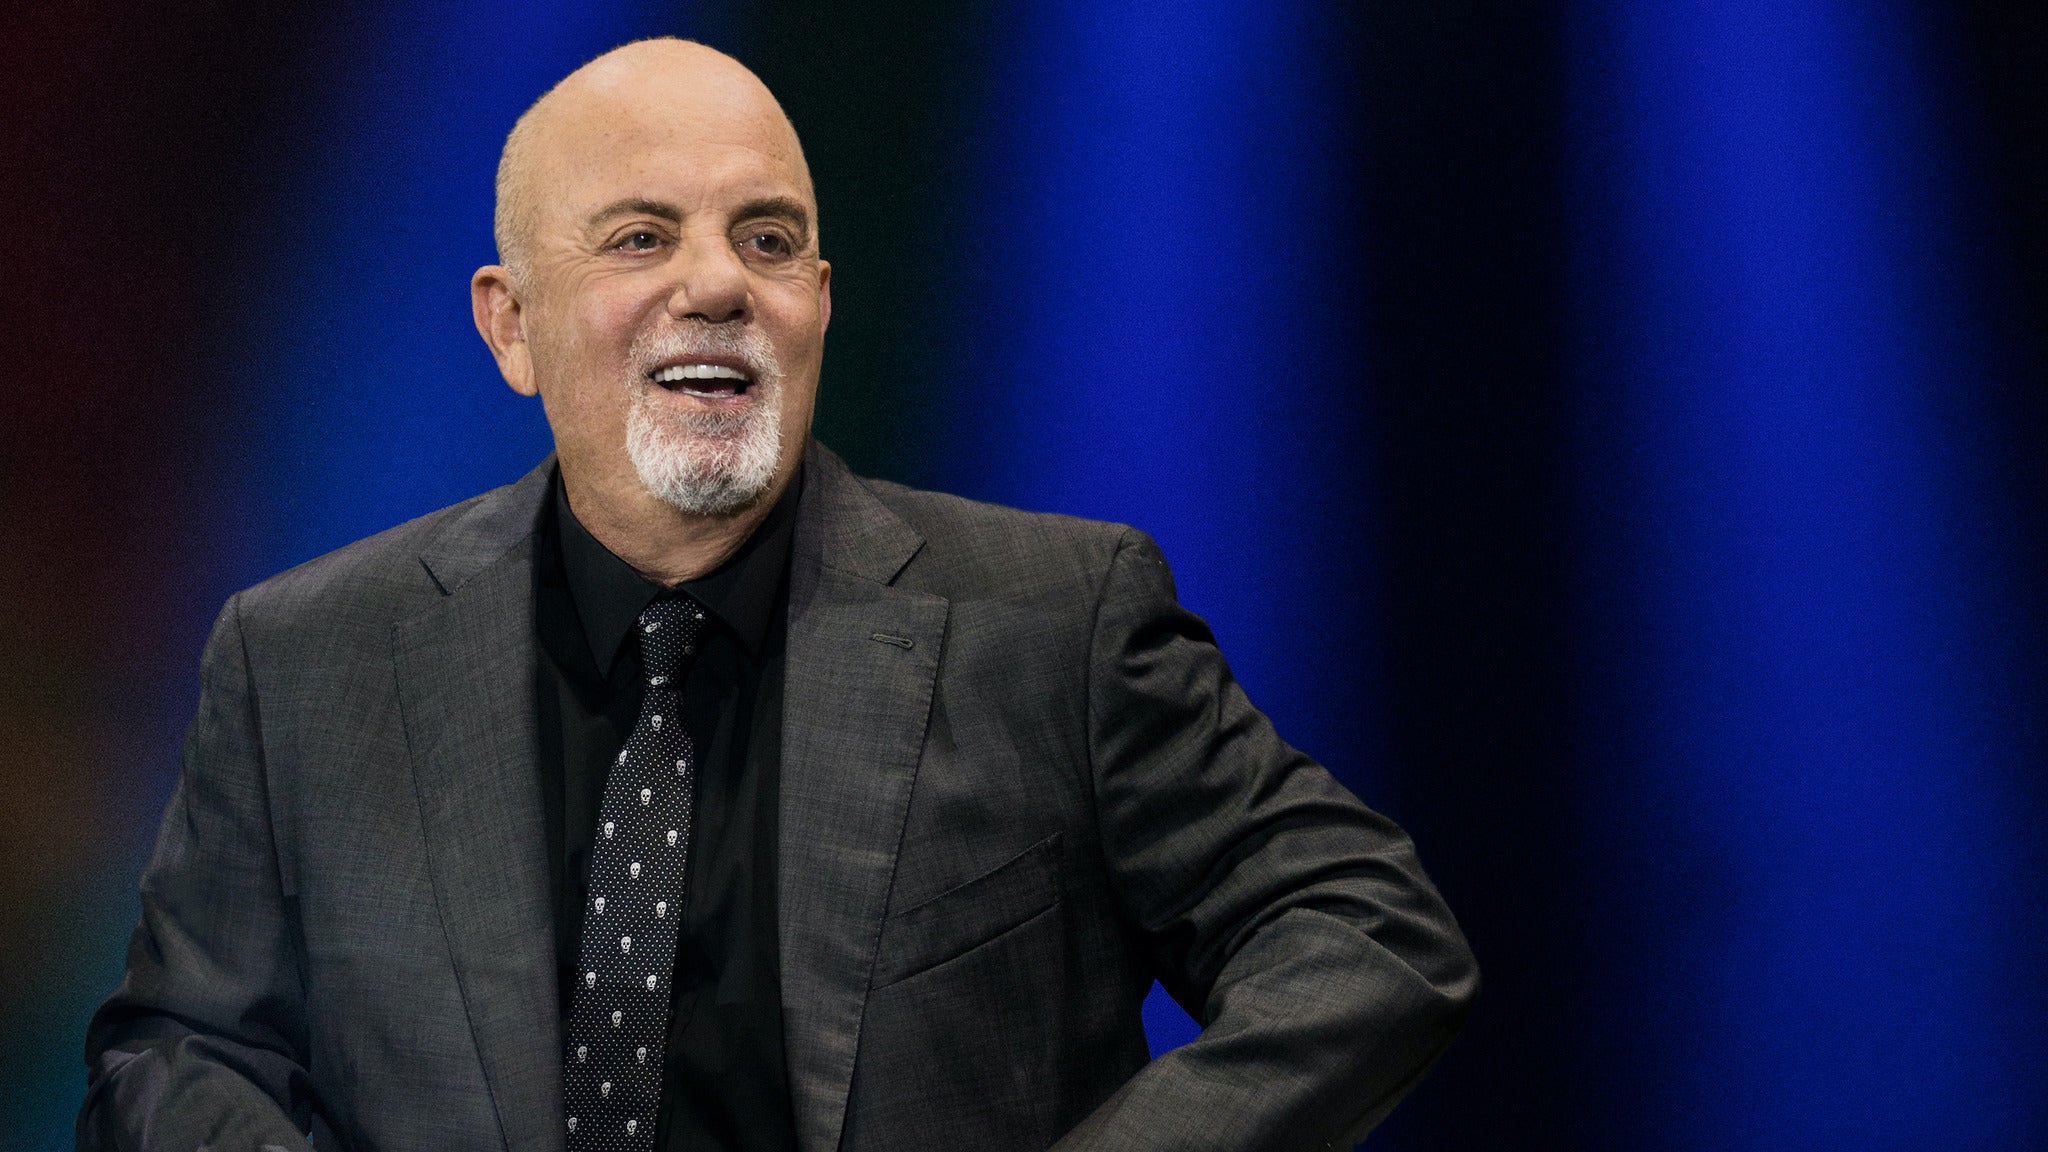 Billy Joel - In Concert pre-sale code for show tickets in New York, NY (Madison Square Garden)